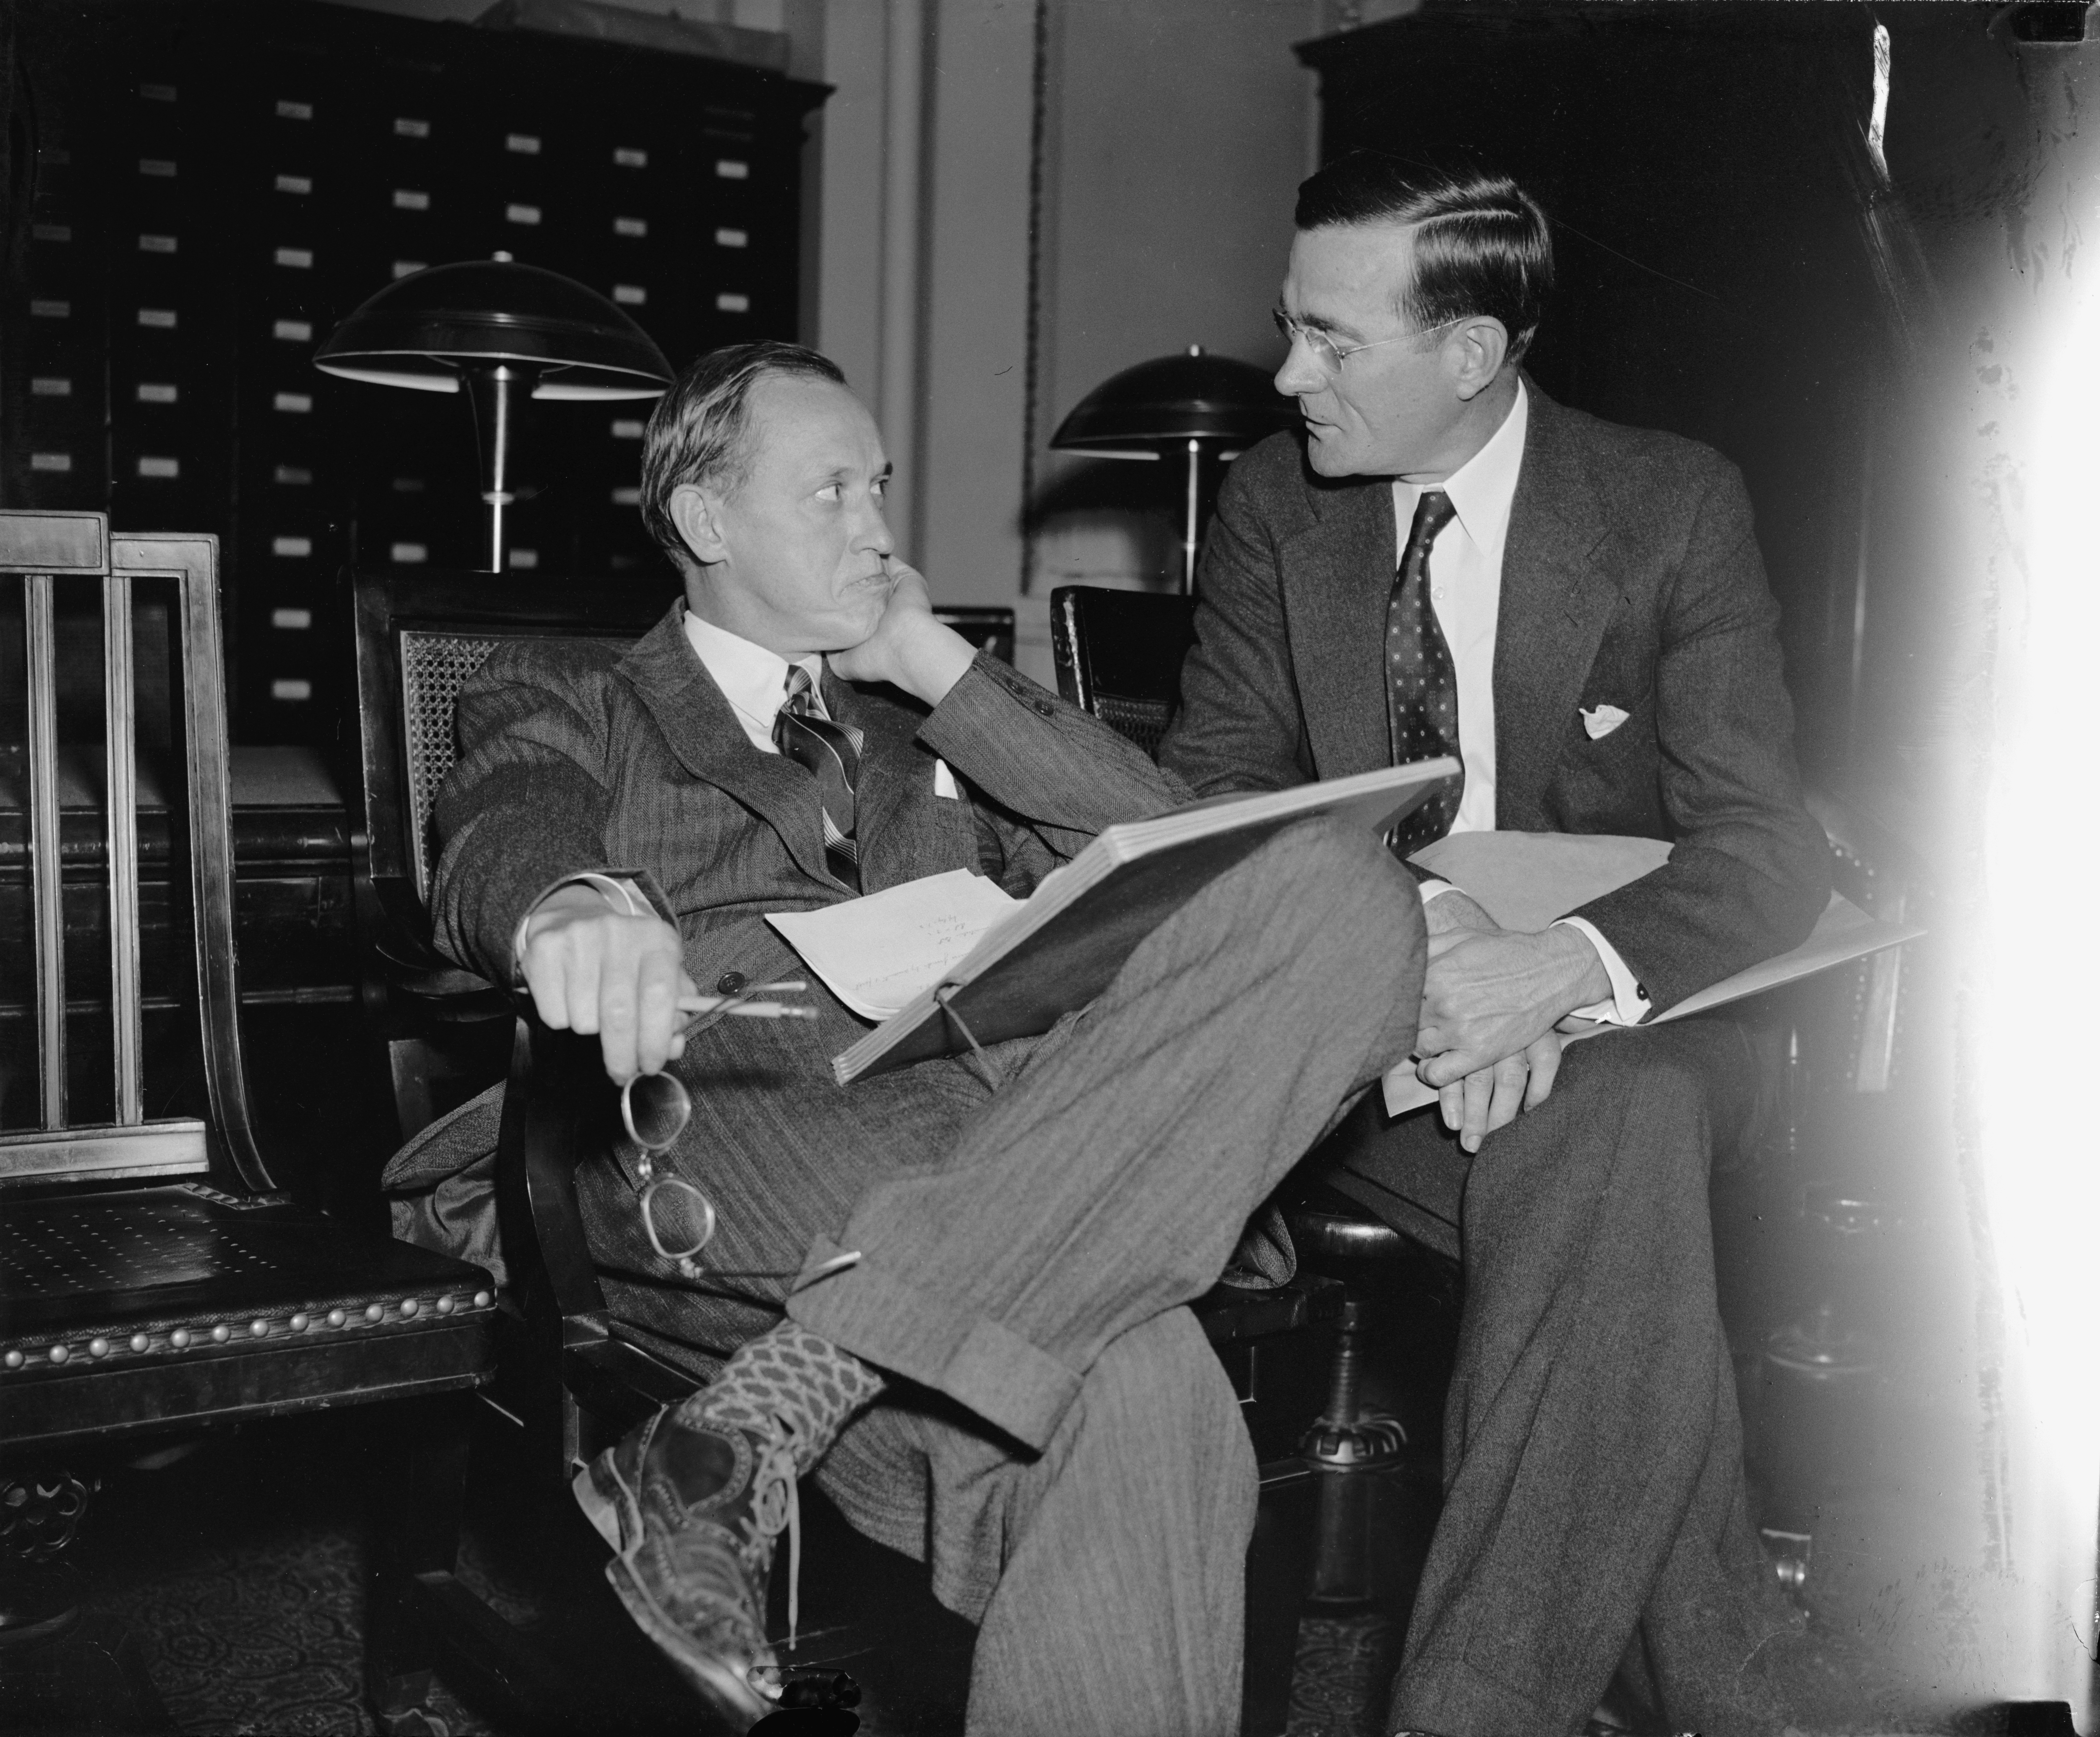 Harry Hopkins and Aubrey Williams at the Capitol Building, Washington, United States, 20 Apr 1938